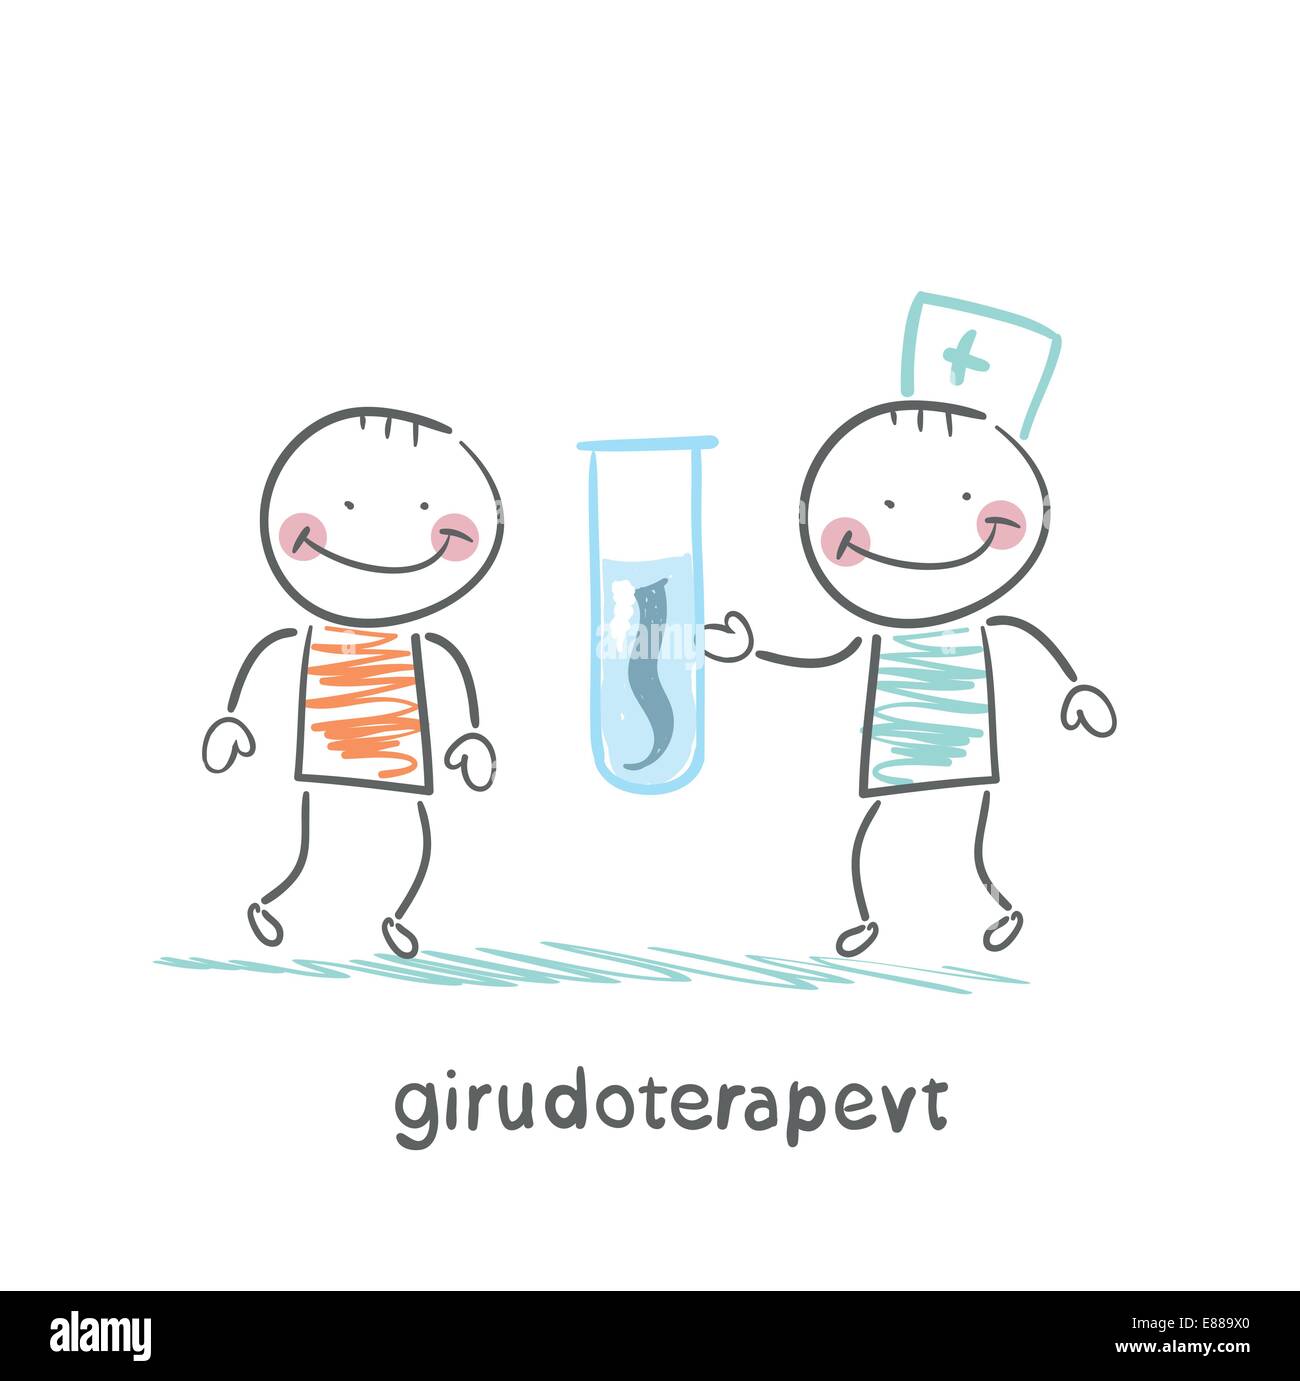 girudoterapevt shows the patient tube with leeches Stock Vector